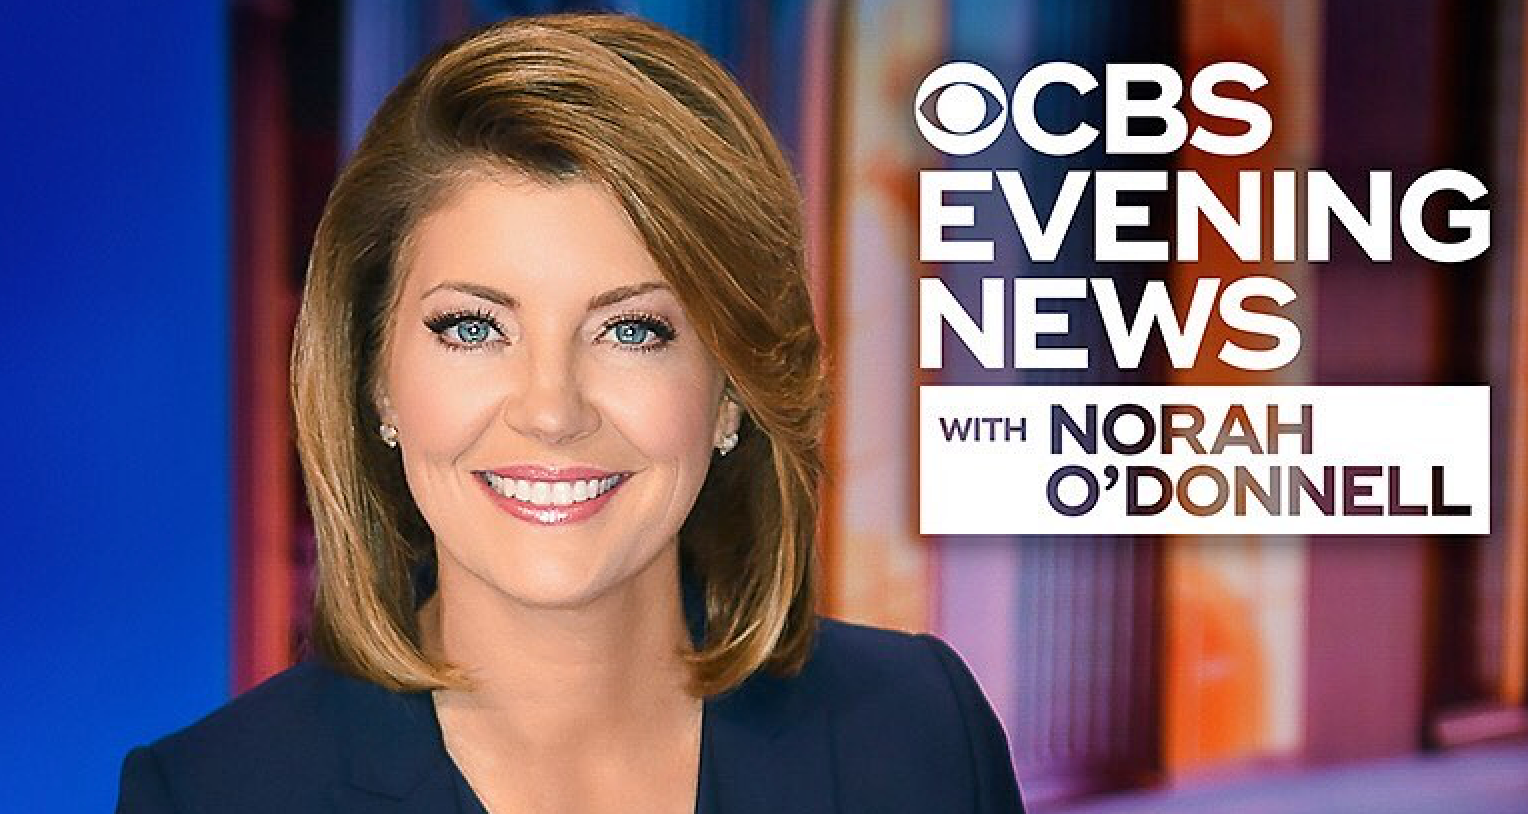 What Happened to 'CBS Evening News'? The Network Experienced a Huge Glitch